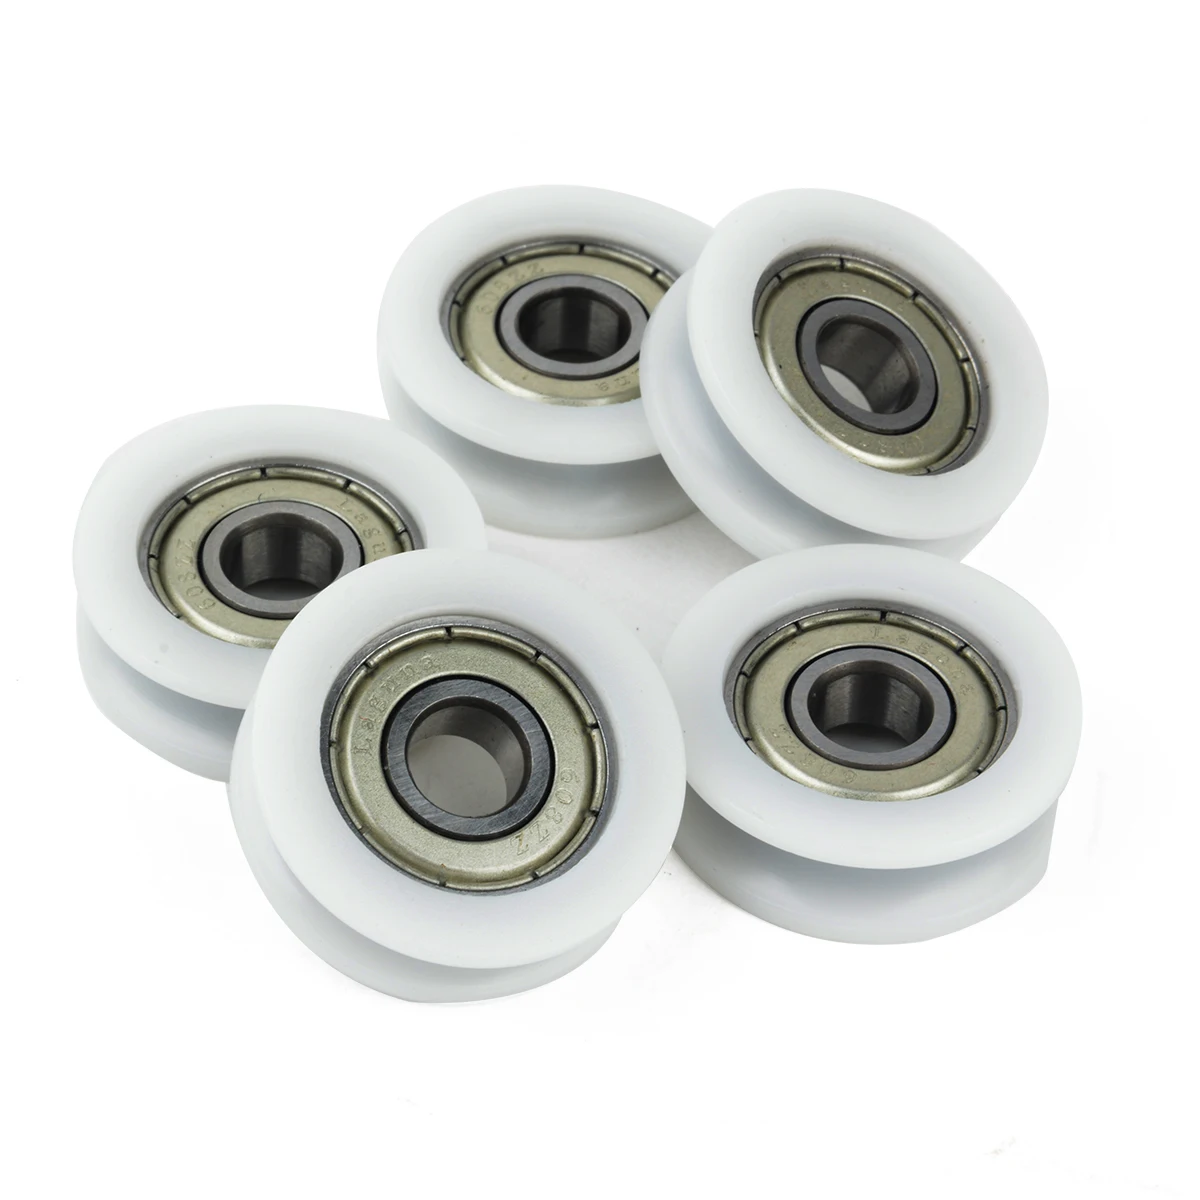 

5Pcs/Set White U Groove Bearing Nylon Plastic Embedded 608 Ball Bearings Guide Pulley Size 8x30x10mm for Mobile Door Window